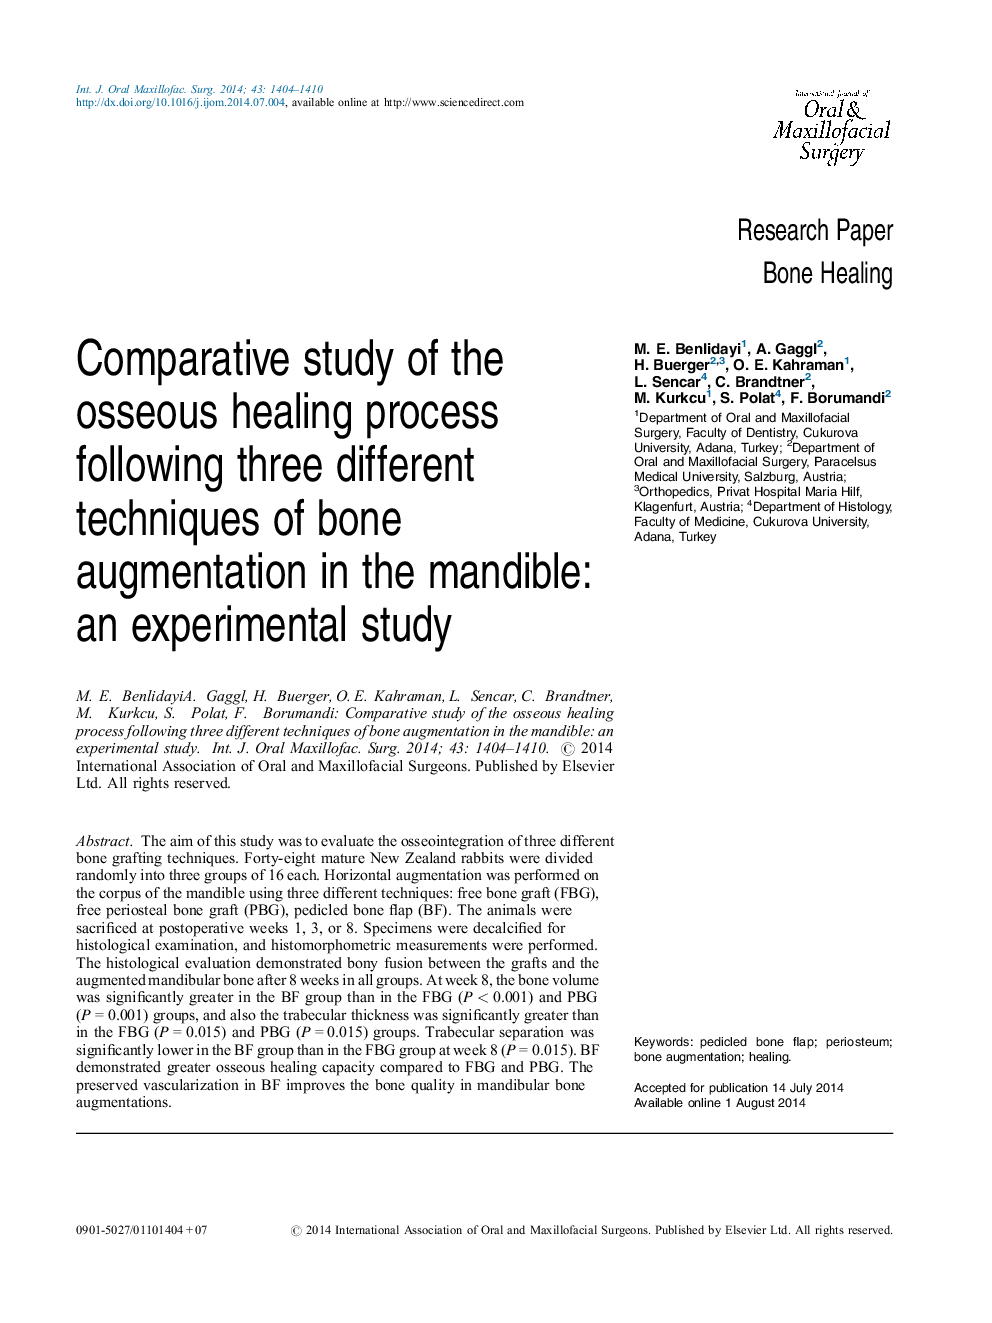 Comparative study of the osseous healing process following three different techniques of bone augmentation in the mandible: an experimental study